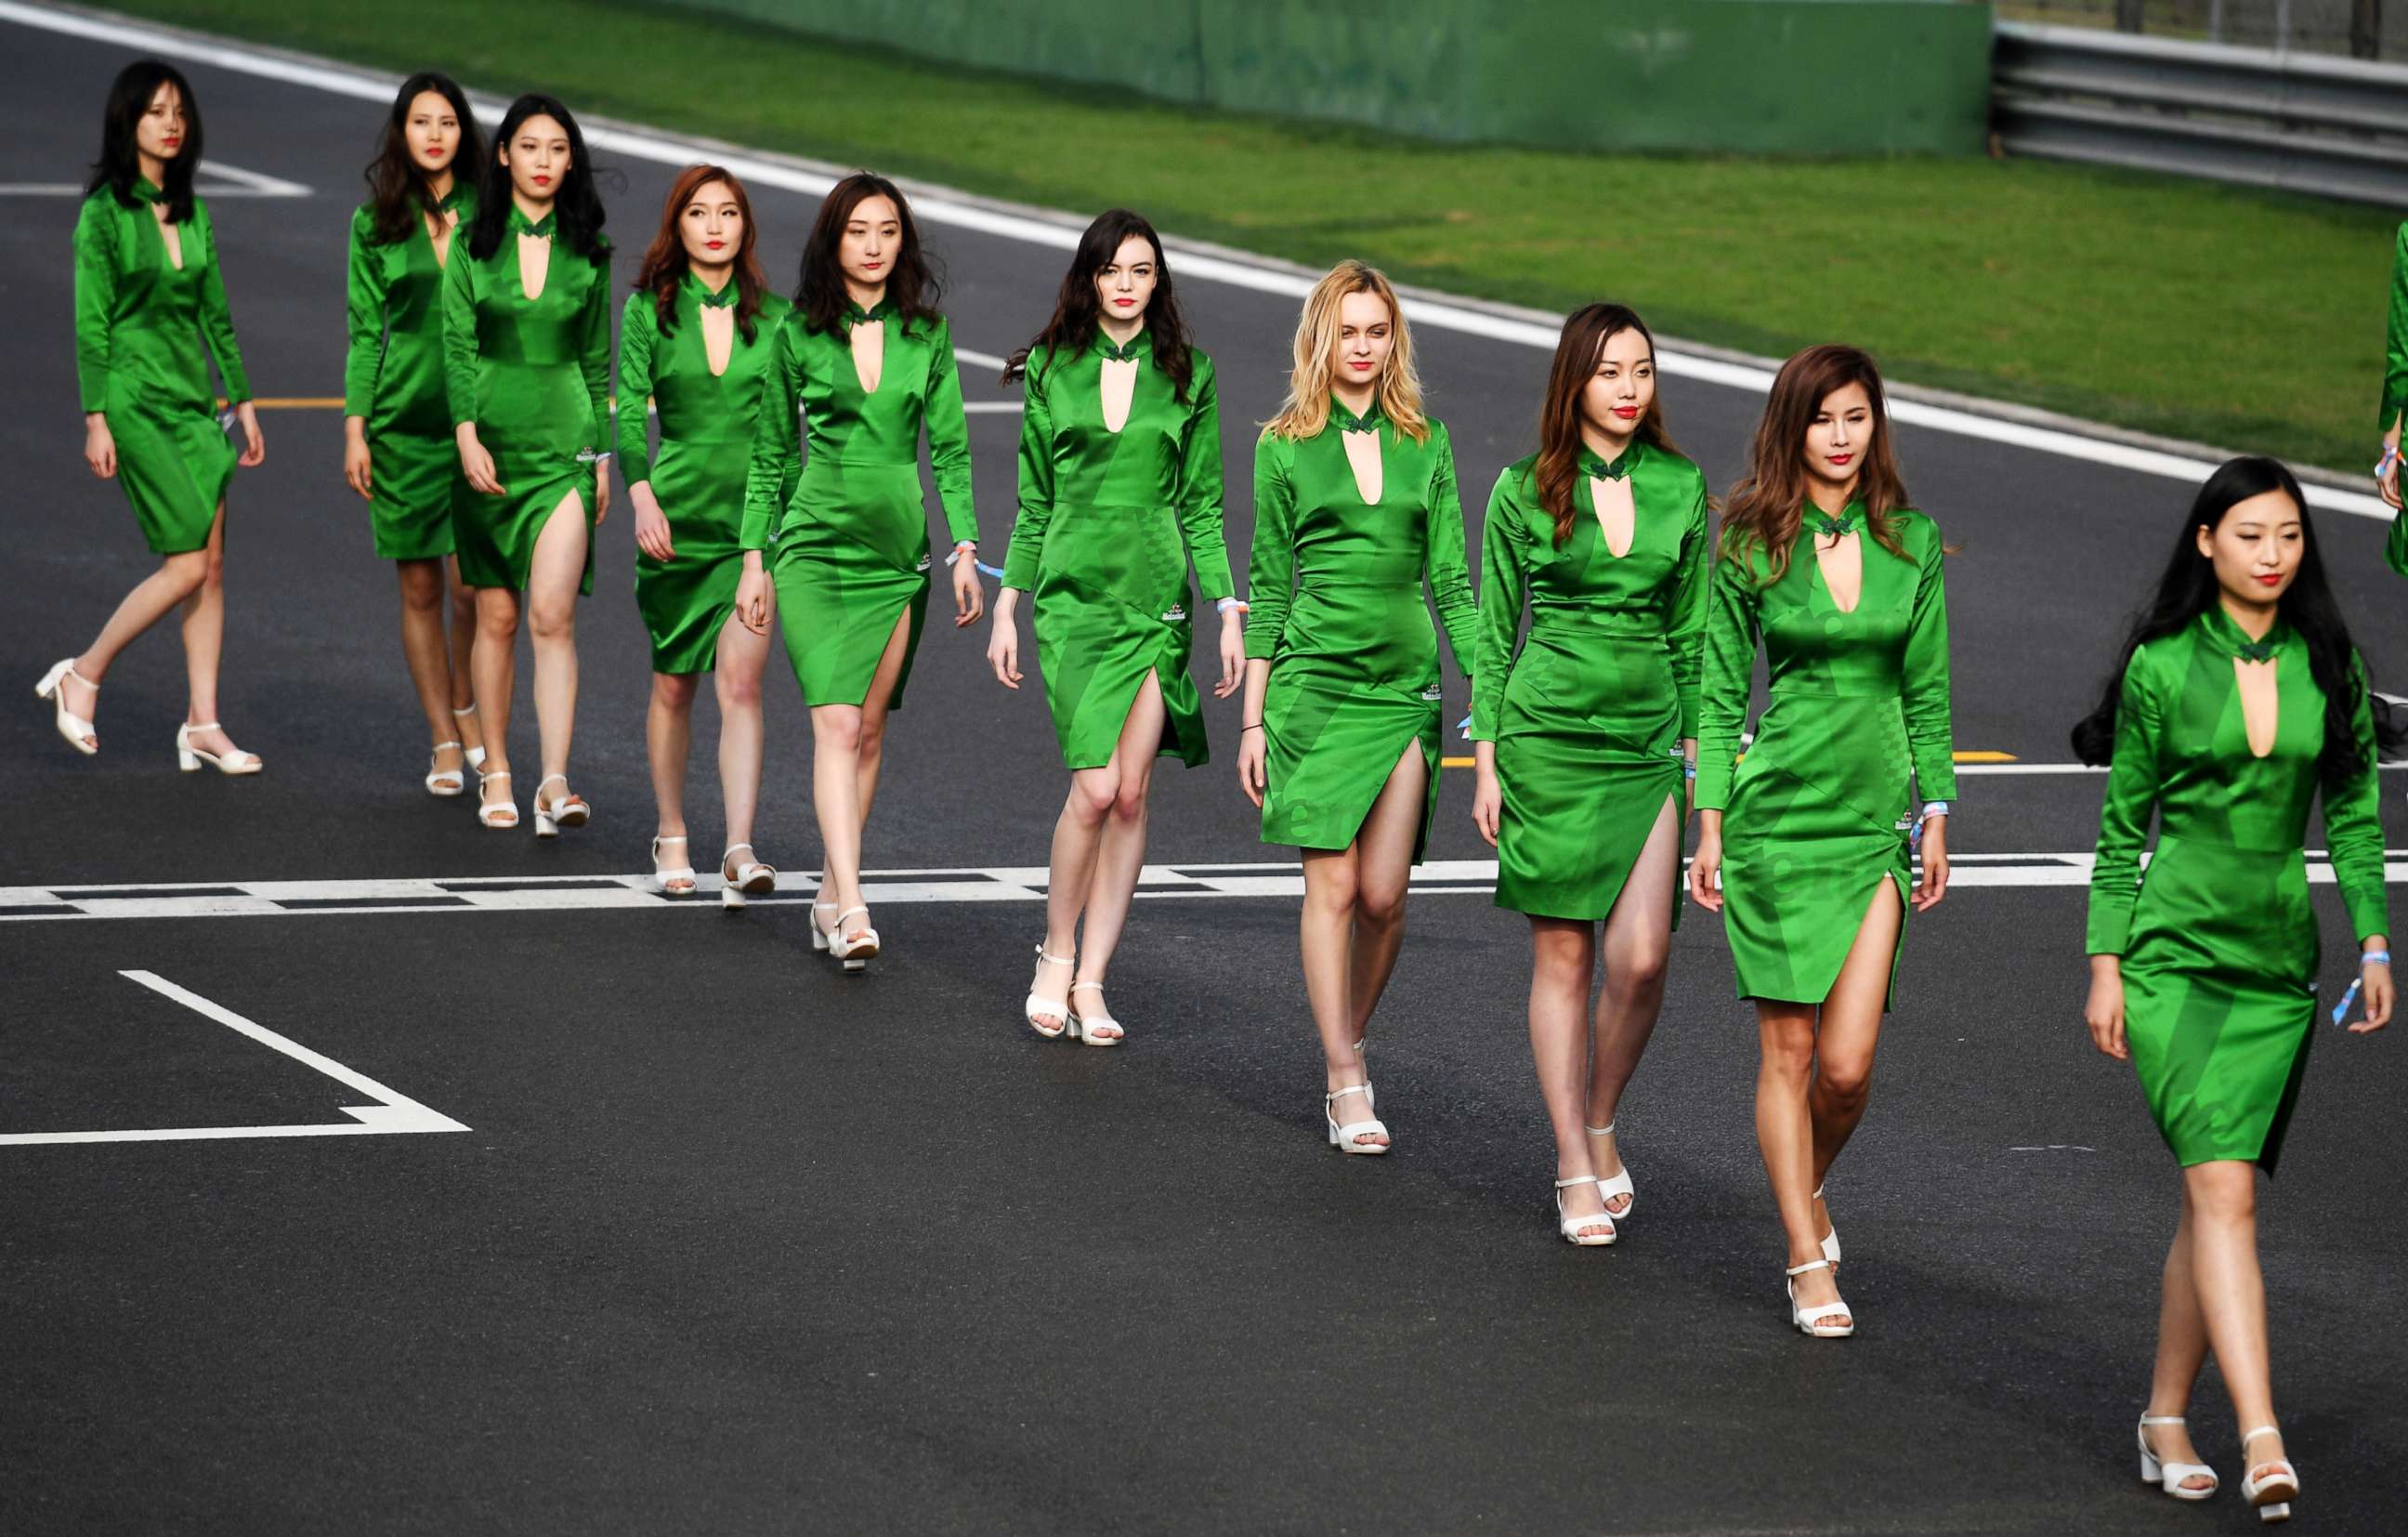 PHOTO: Grid girls walk on the track after the qualifying session for the Formula One Chinese Grand Prix in Shanghai, April 8, 2017.